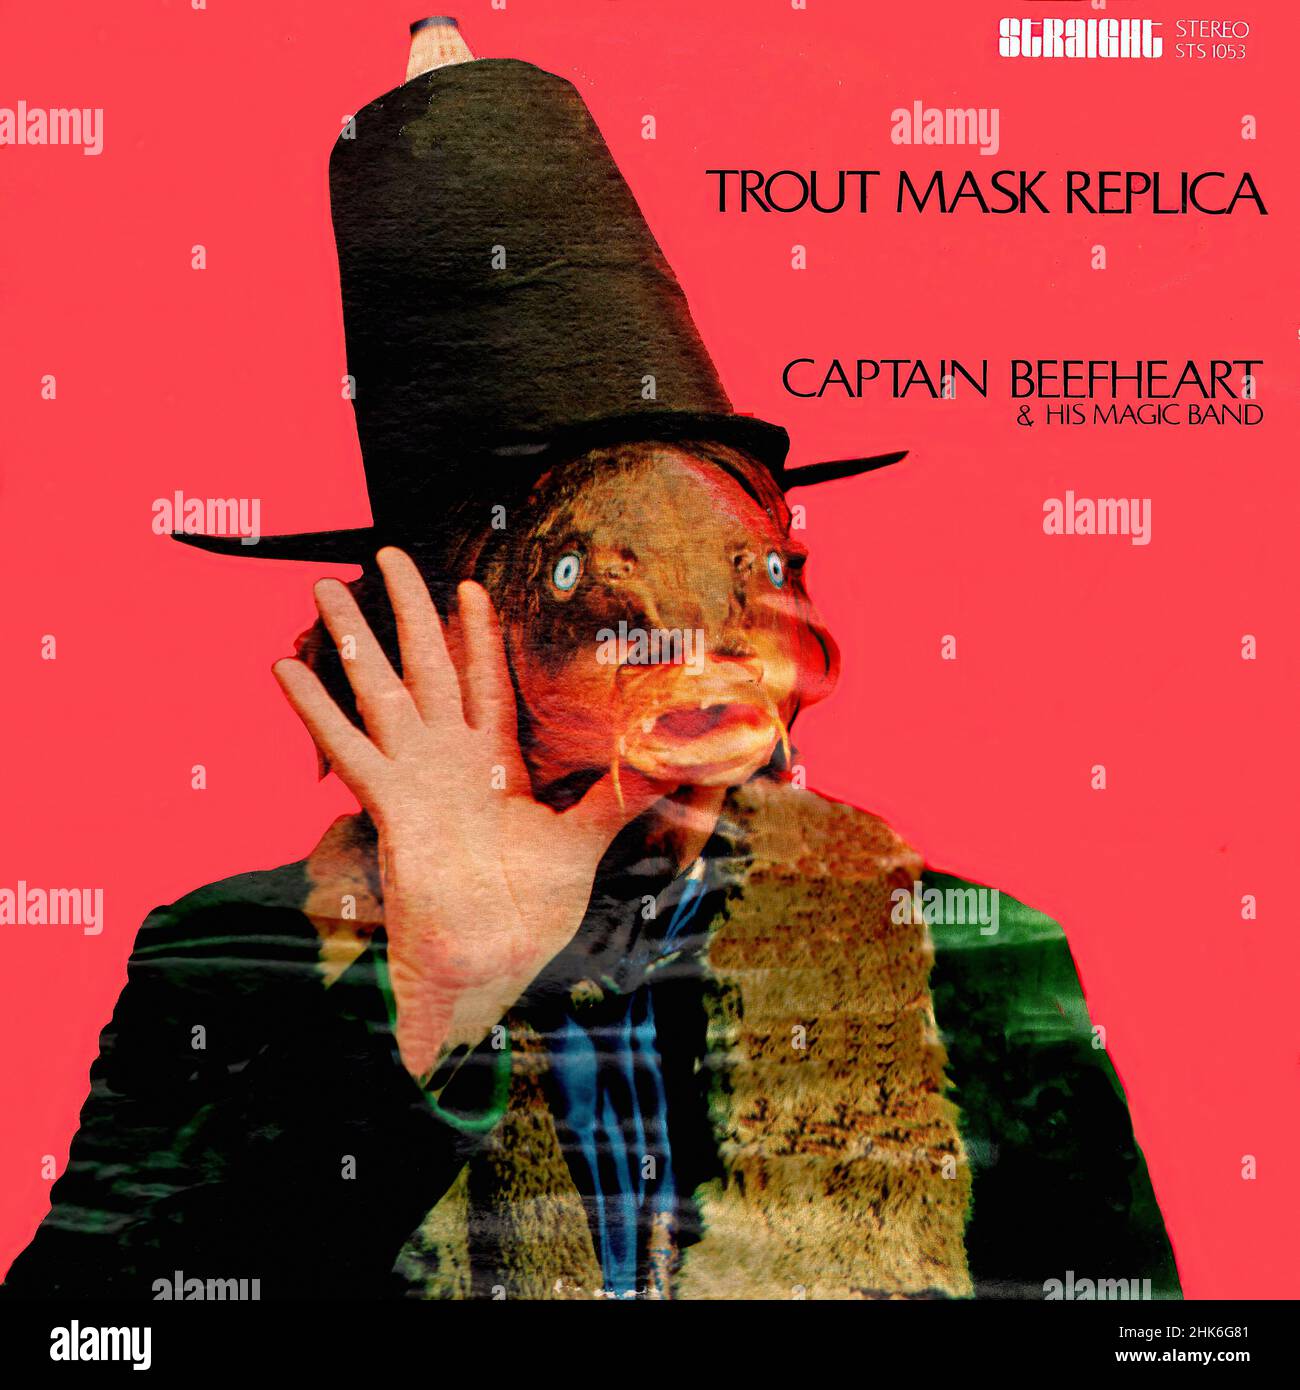 Vintage vinyl record cover - Captain Beefheart - Trout Mask Replica - US - 1969 Stock Photo